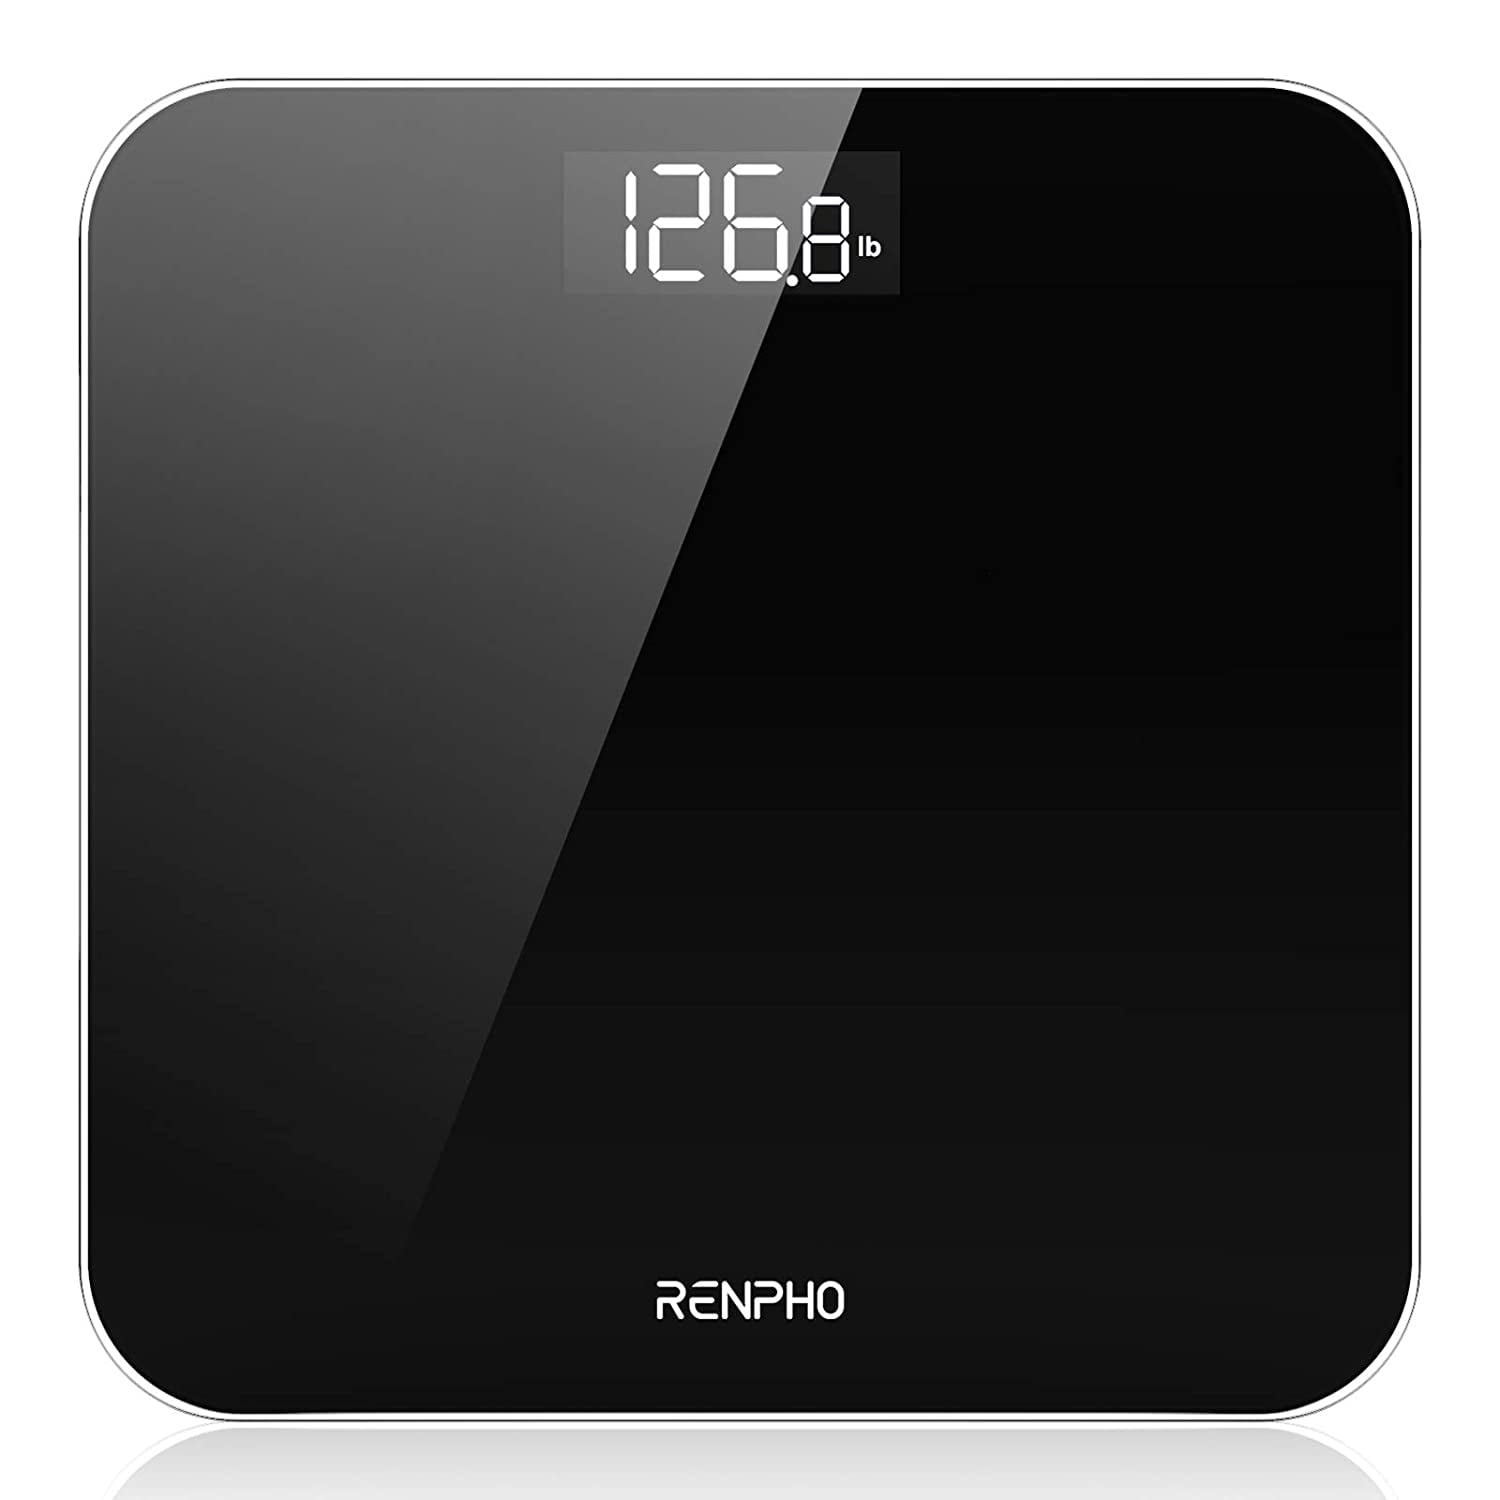 RENPHO Digital Body Weight Scale, Highly Accurate Scale for